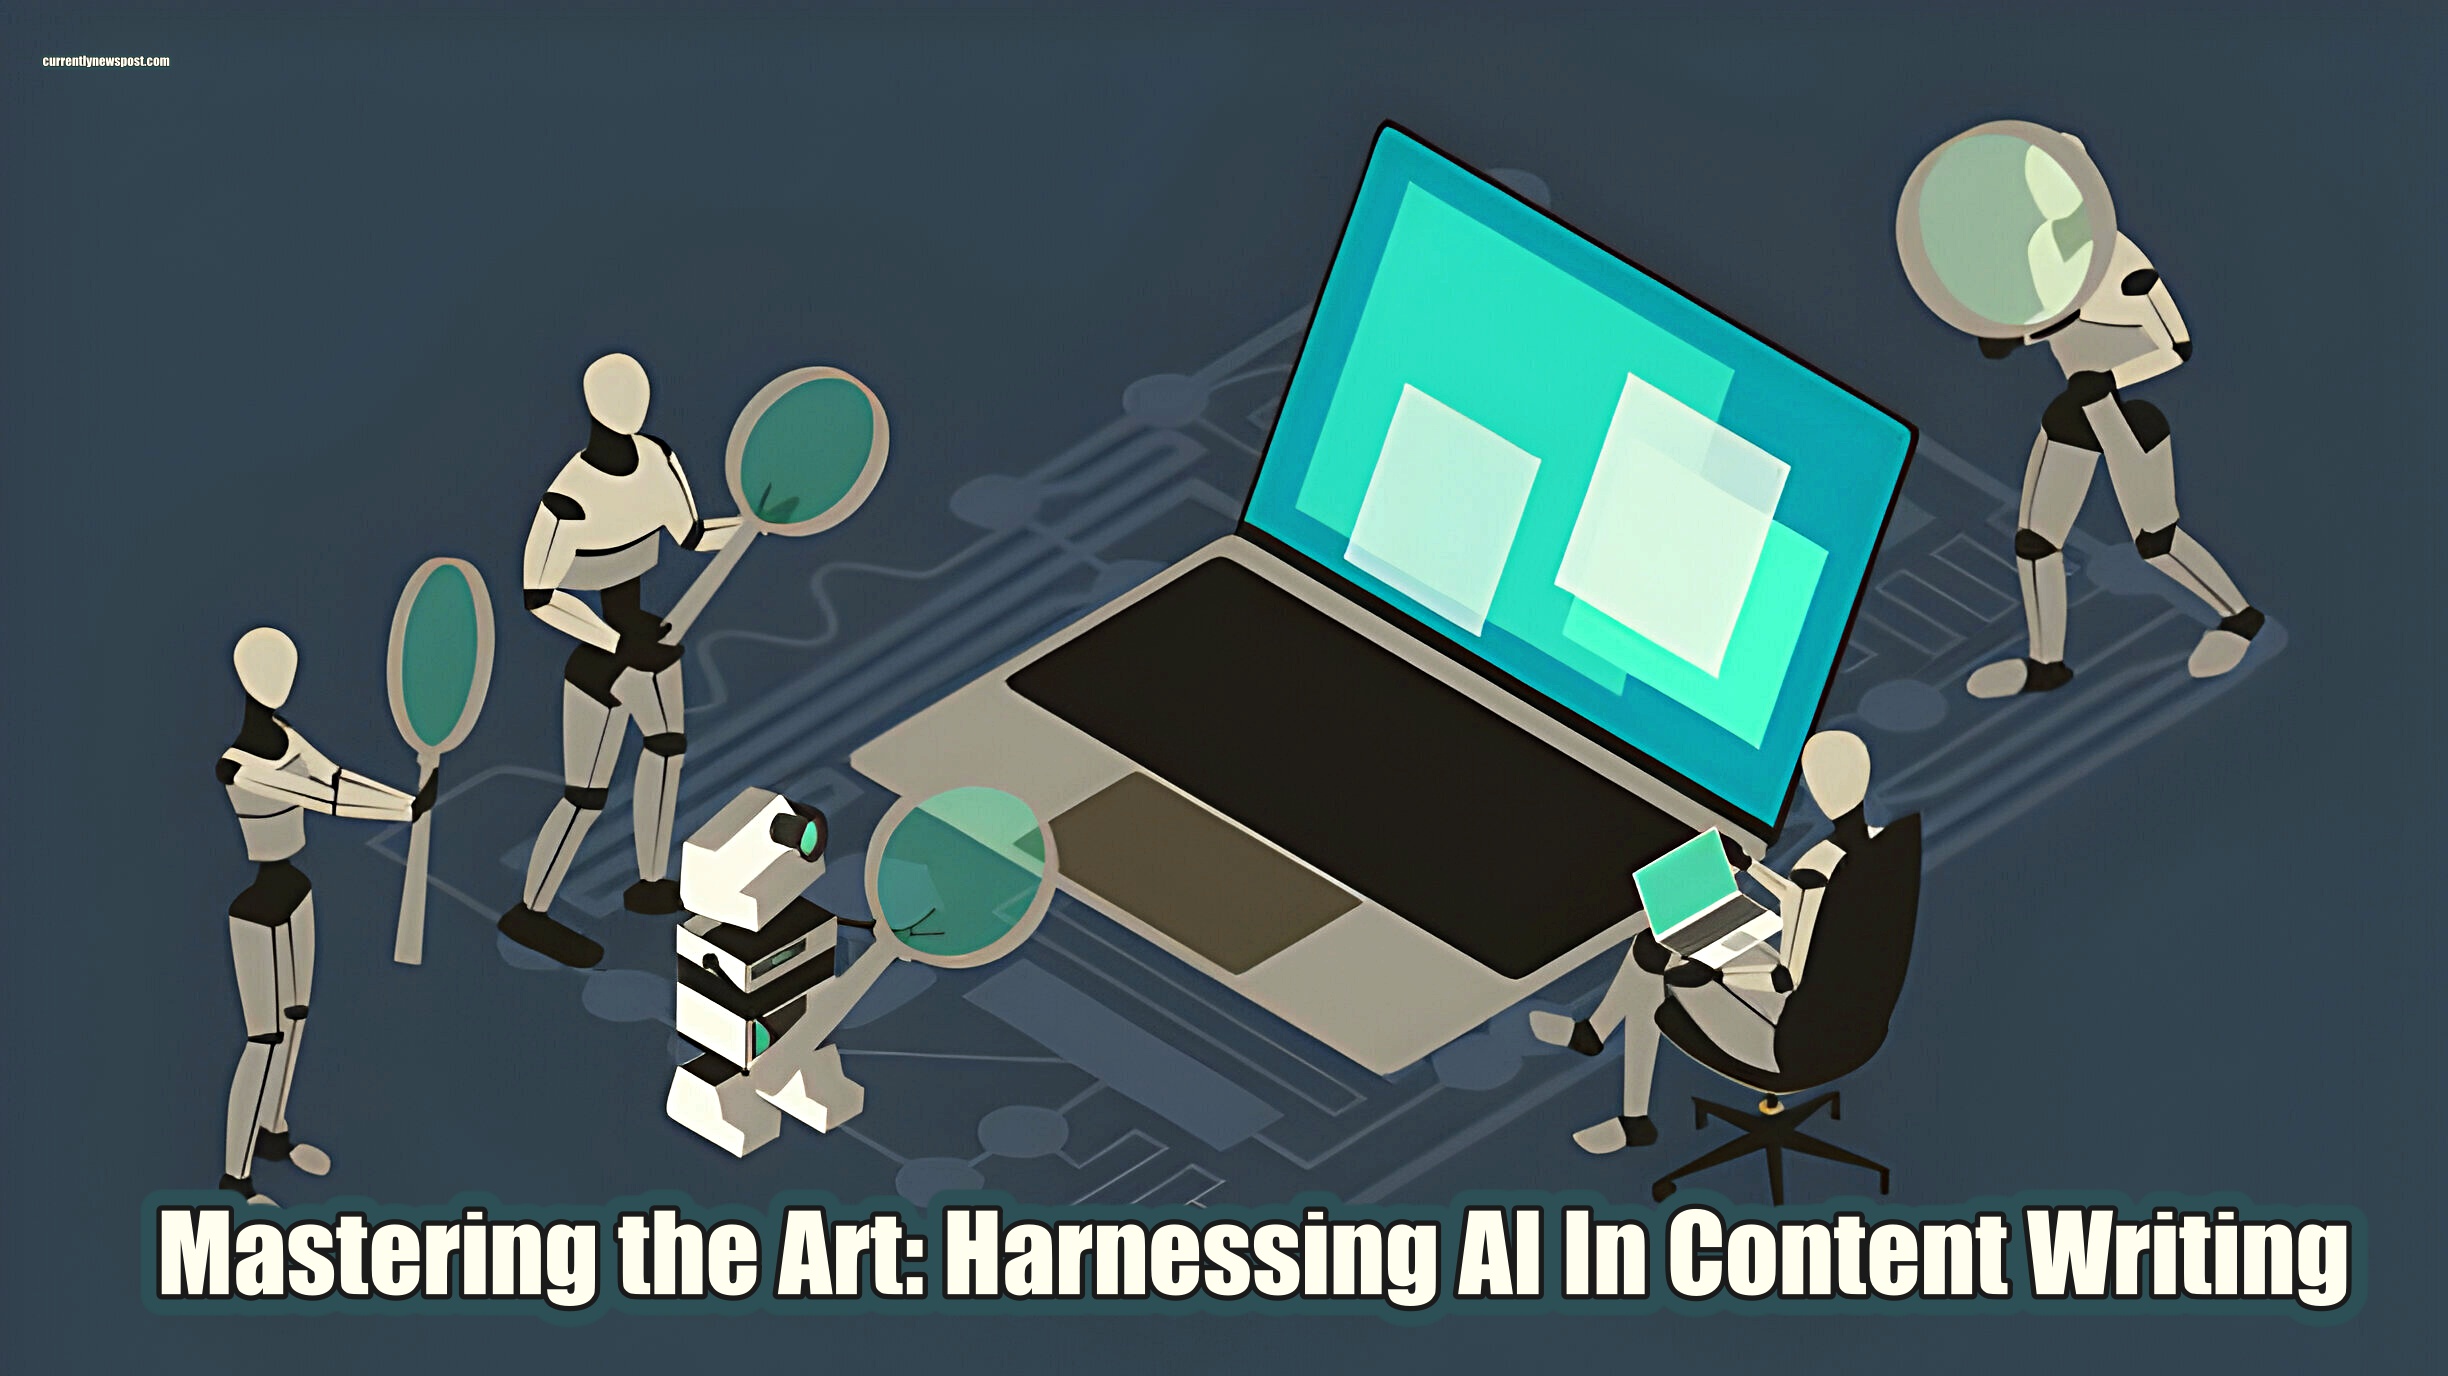 Mastering the Art: Harnessing AI In Content Writing